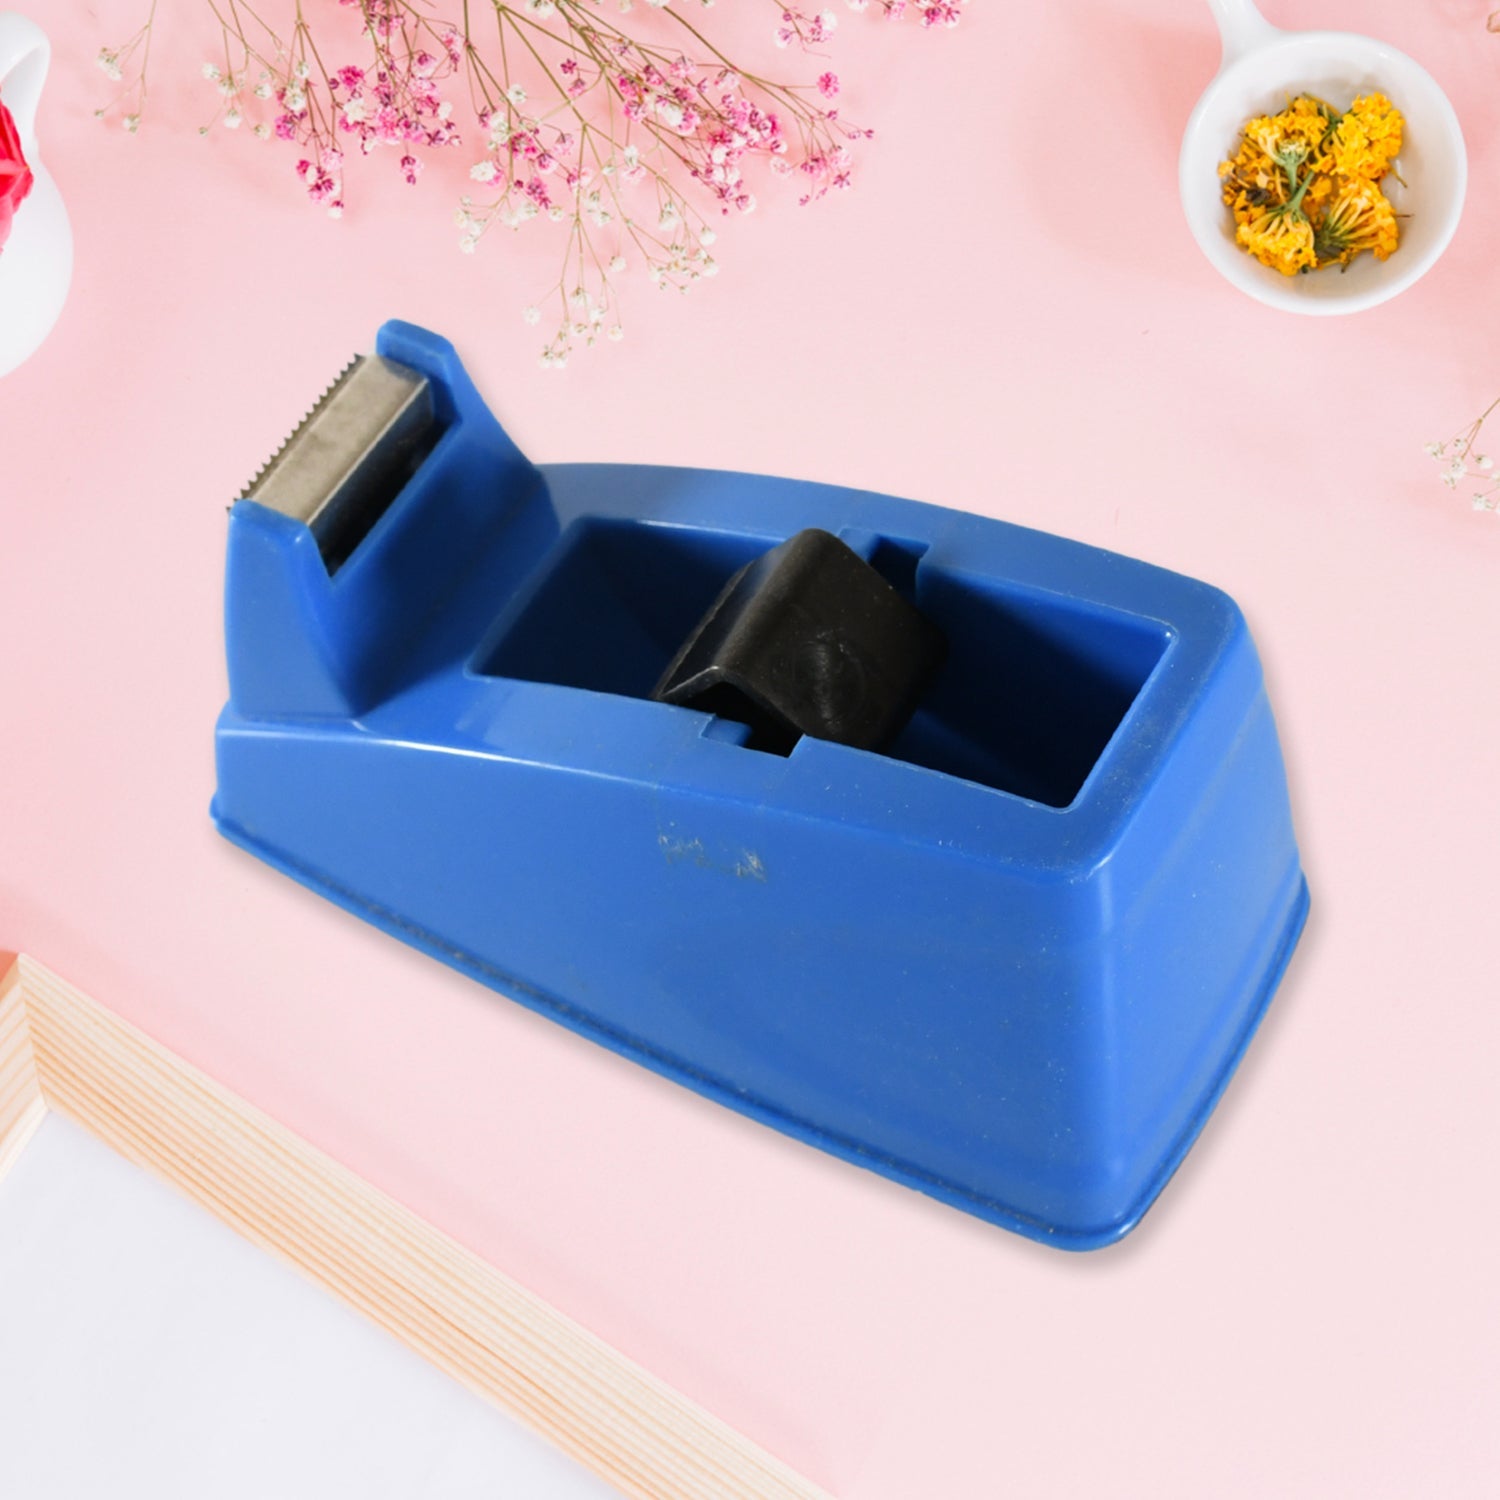 9466 Plastic Tape Dispenser Cutter for Home Office use, Tape Dispenser for Stationary, Tape Cutter Packaging Tape School Supplies (1 pc / 200 Gm)